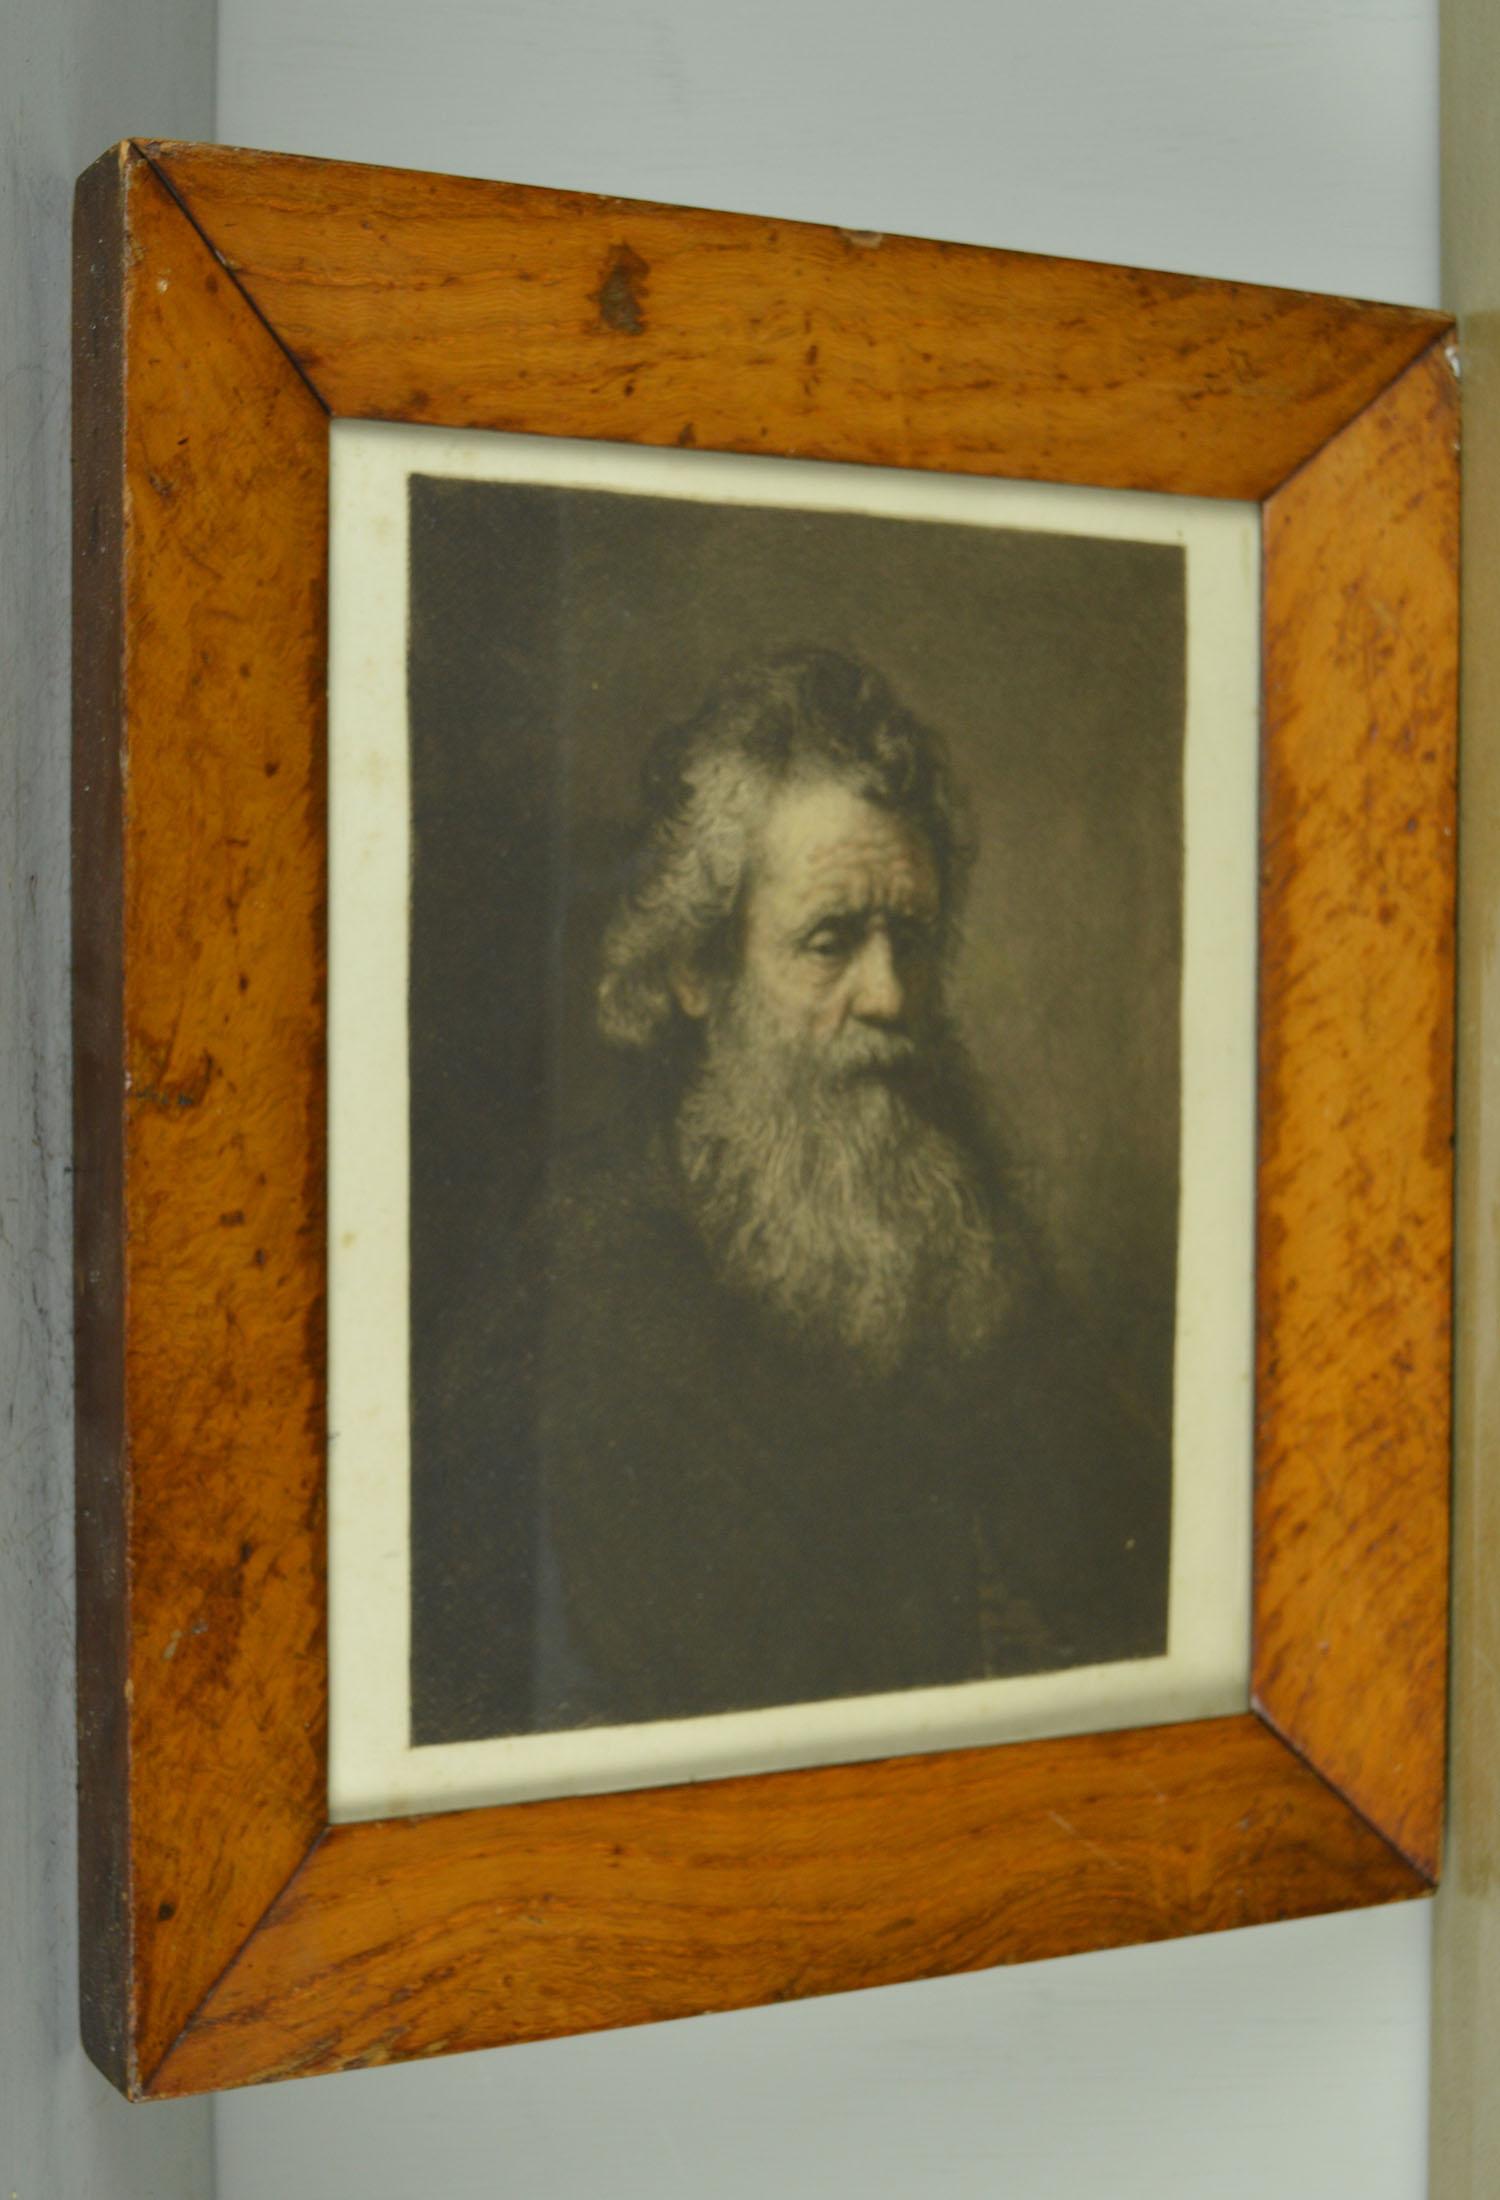 Great image of an old man.

Original etching after a drawing by Rembrandt.

Published, circa 1850.

Presented in an antique maple frame of a similar date.

The measurement given below is the frame size.

Free shipping.
   